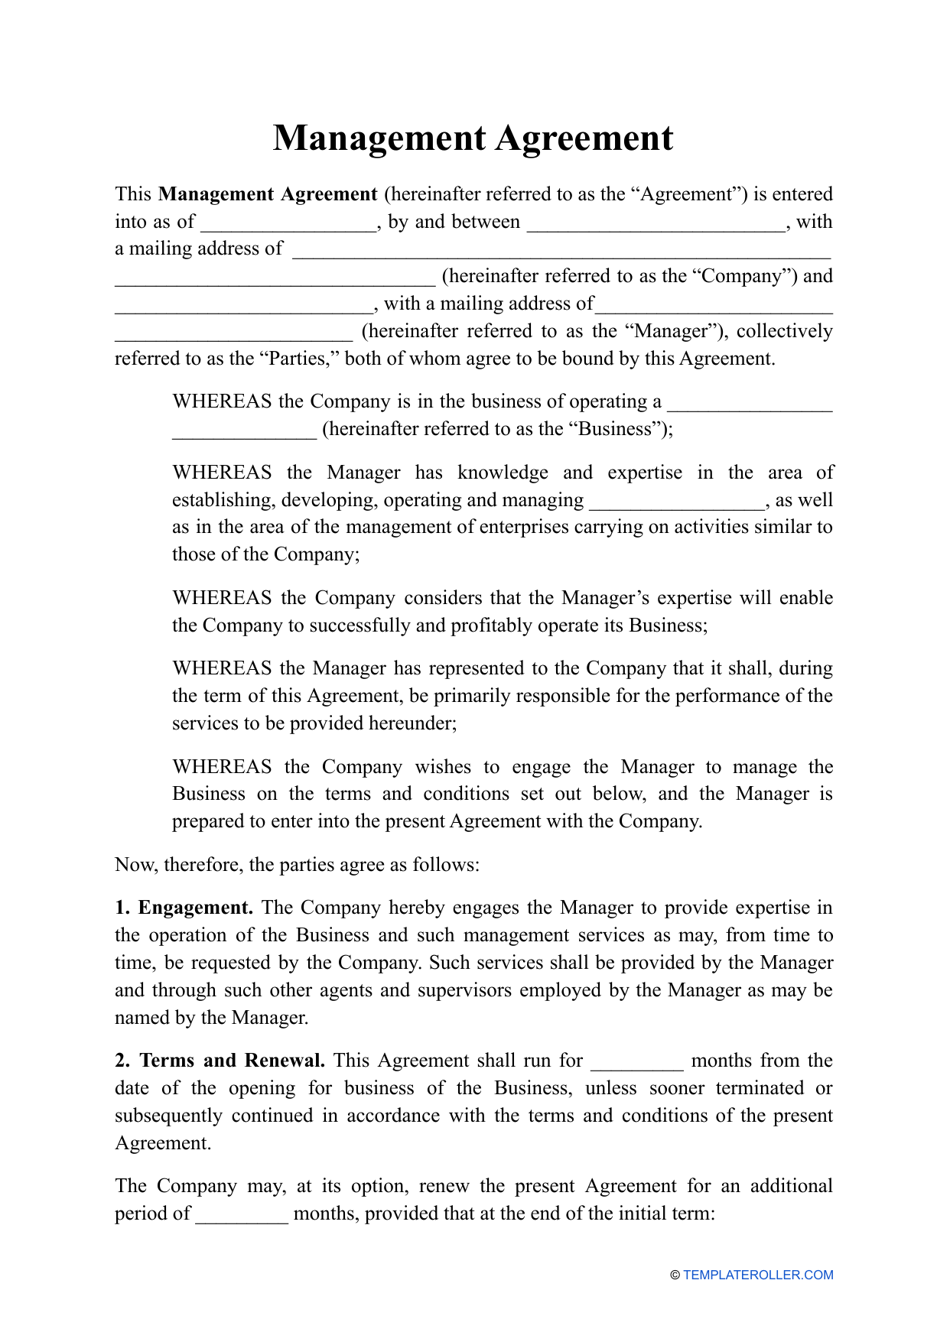 Management Agreement Template, Page 1